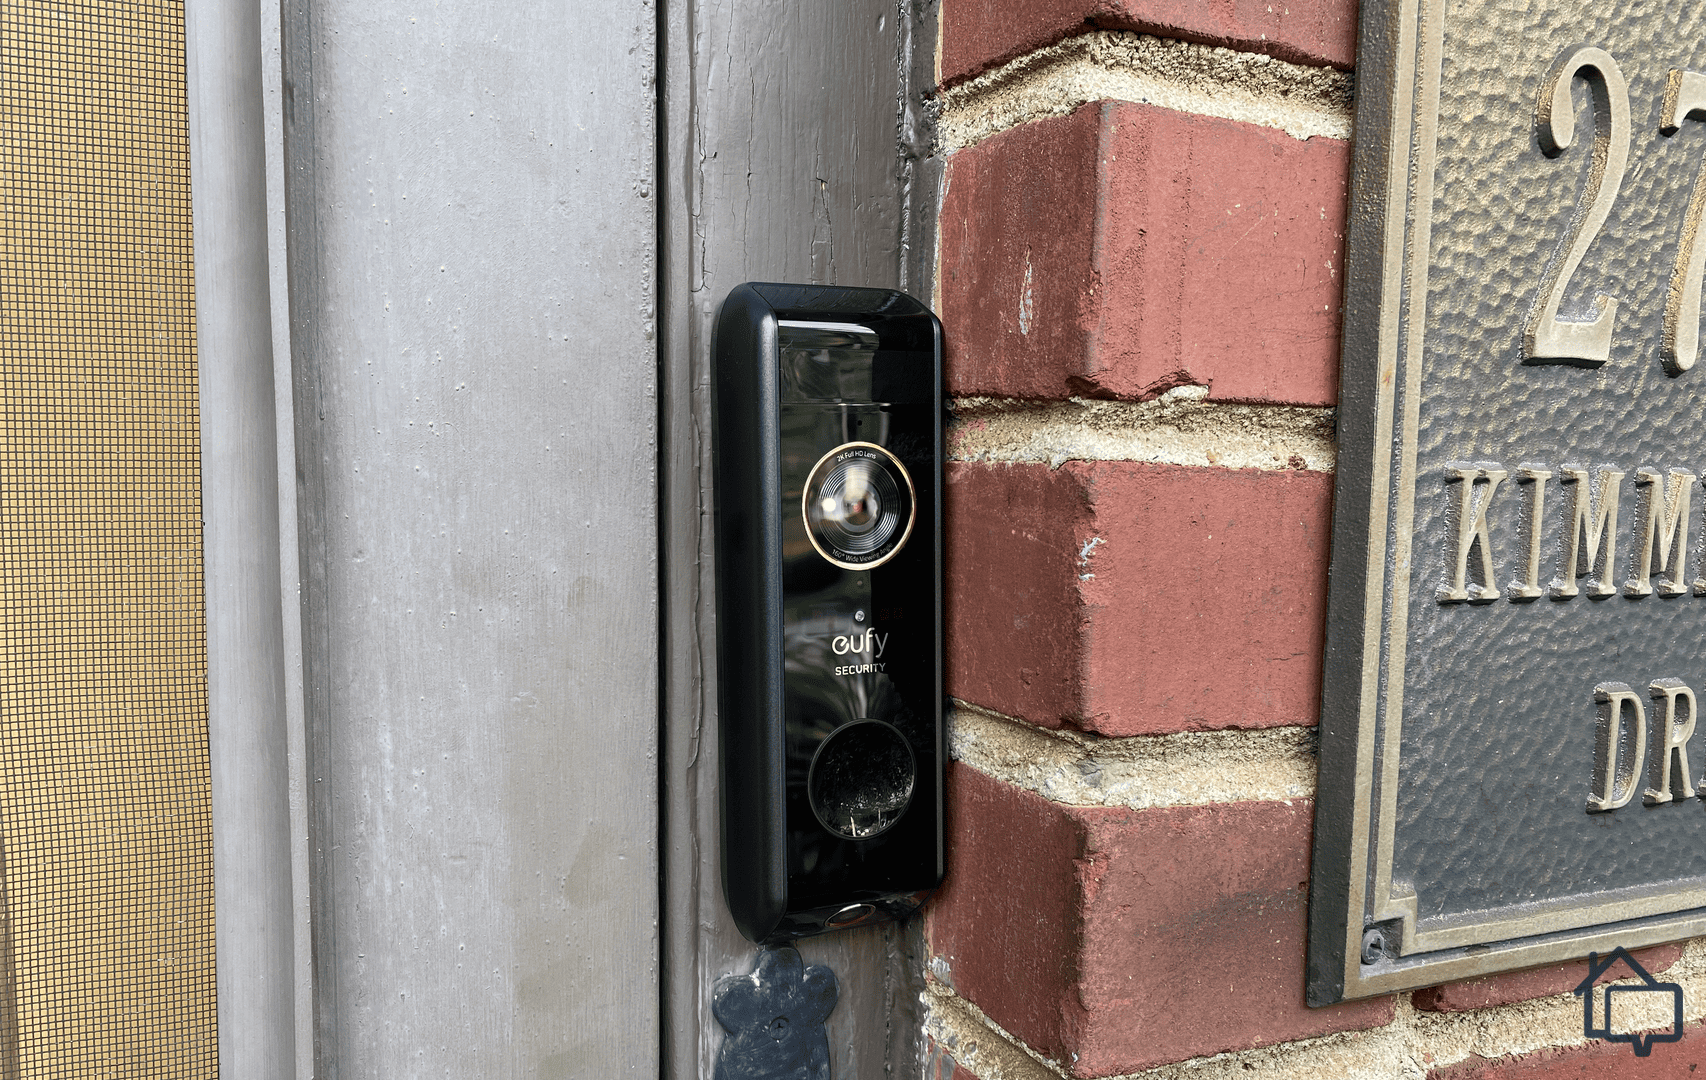 Eufy Security Video Doorbell Review: Why Pay More?